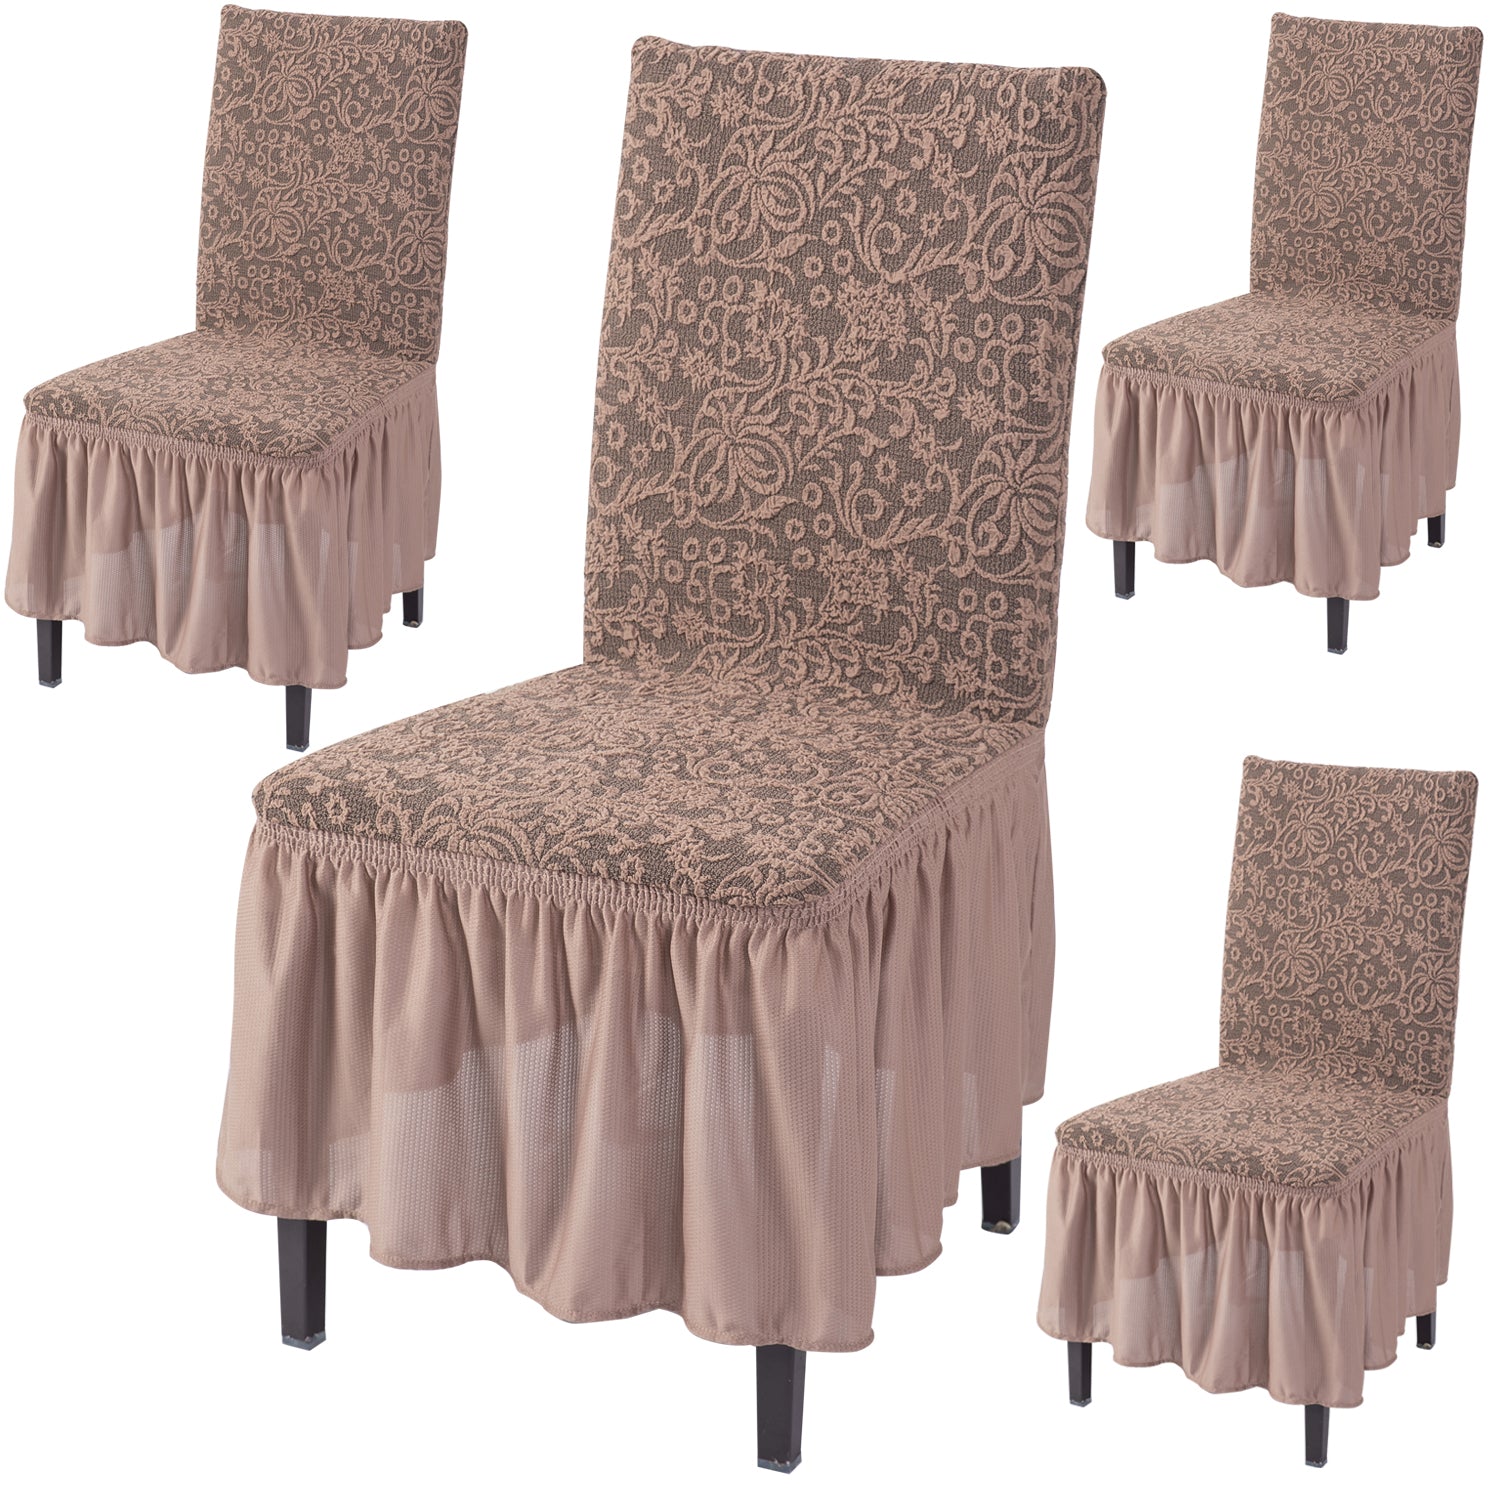 Elastic Stretchable Designer Woven Jacquard Dining Chair Cover with Frill, Light Taupe